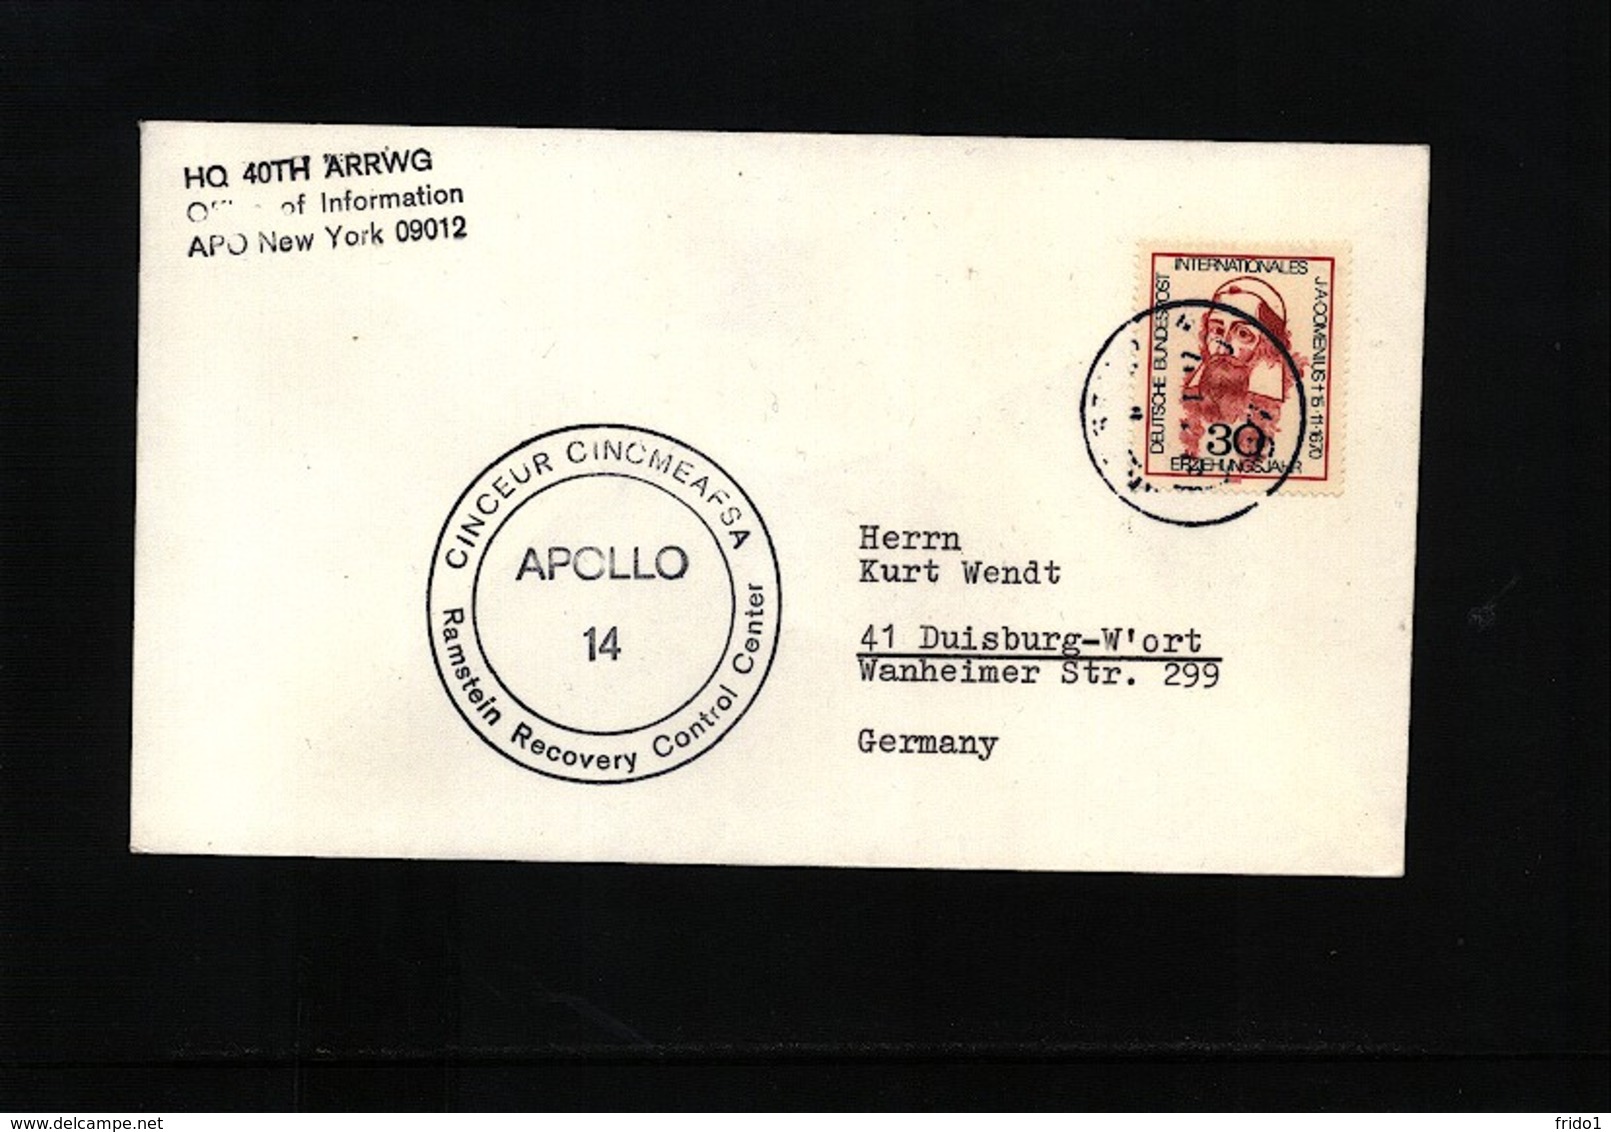 Germany / Deutschland 1971 Space / Raumfahrt  Apollo 14 Ramstein Recovery Control Station Interesting Cover - Europa